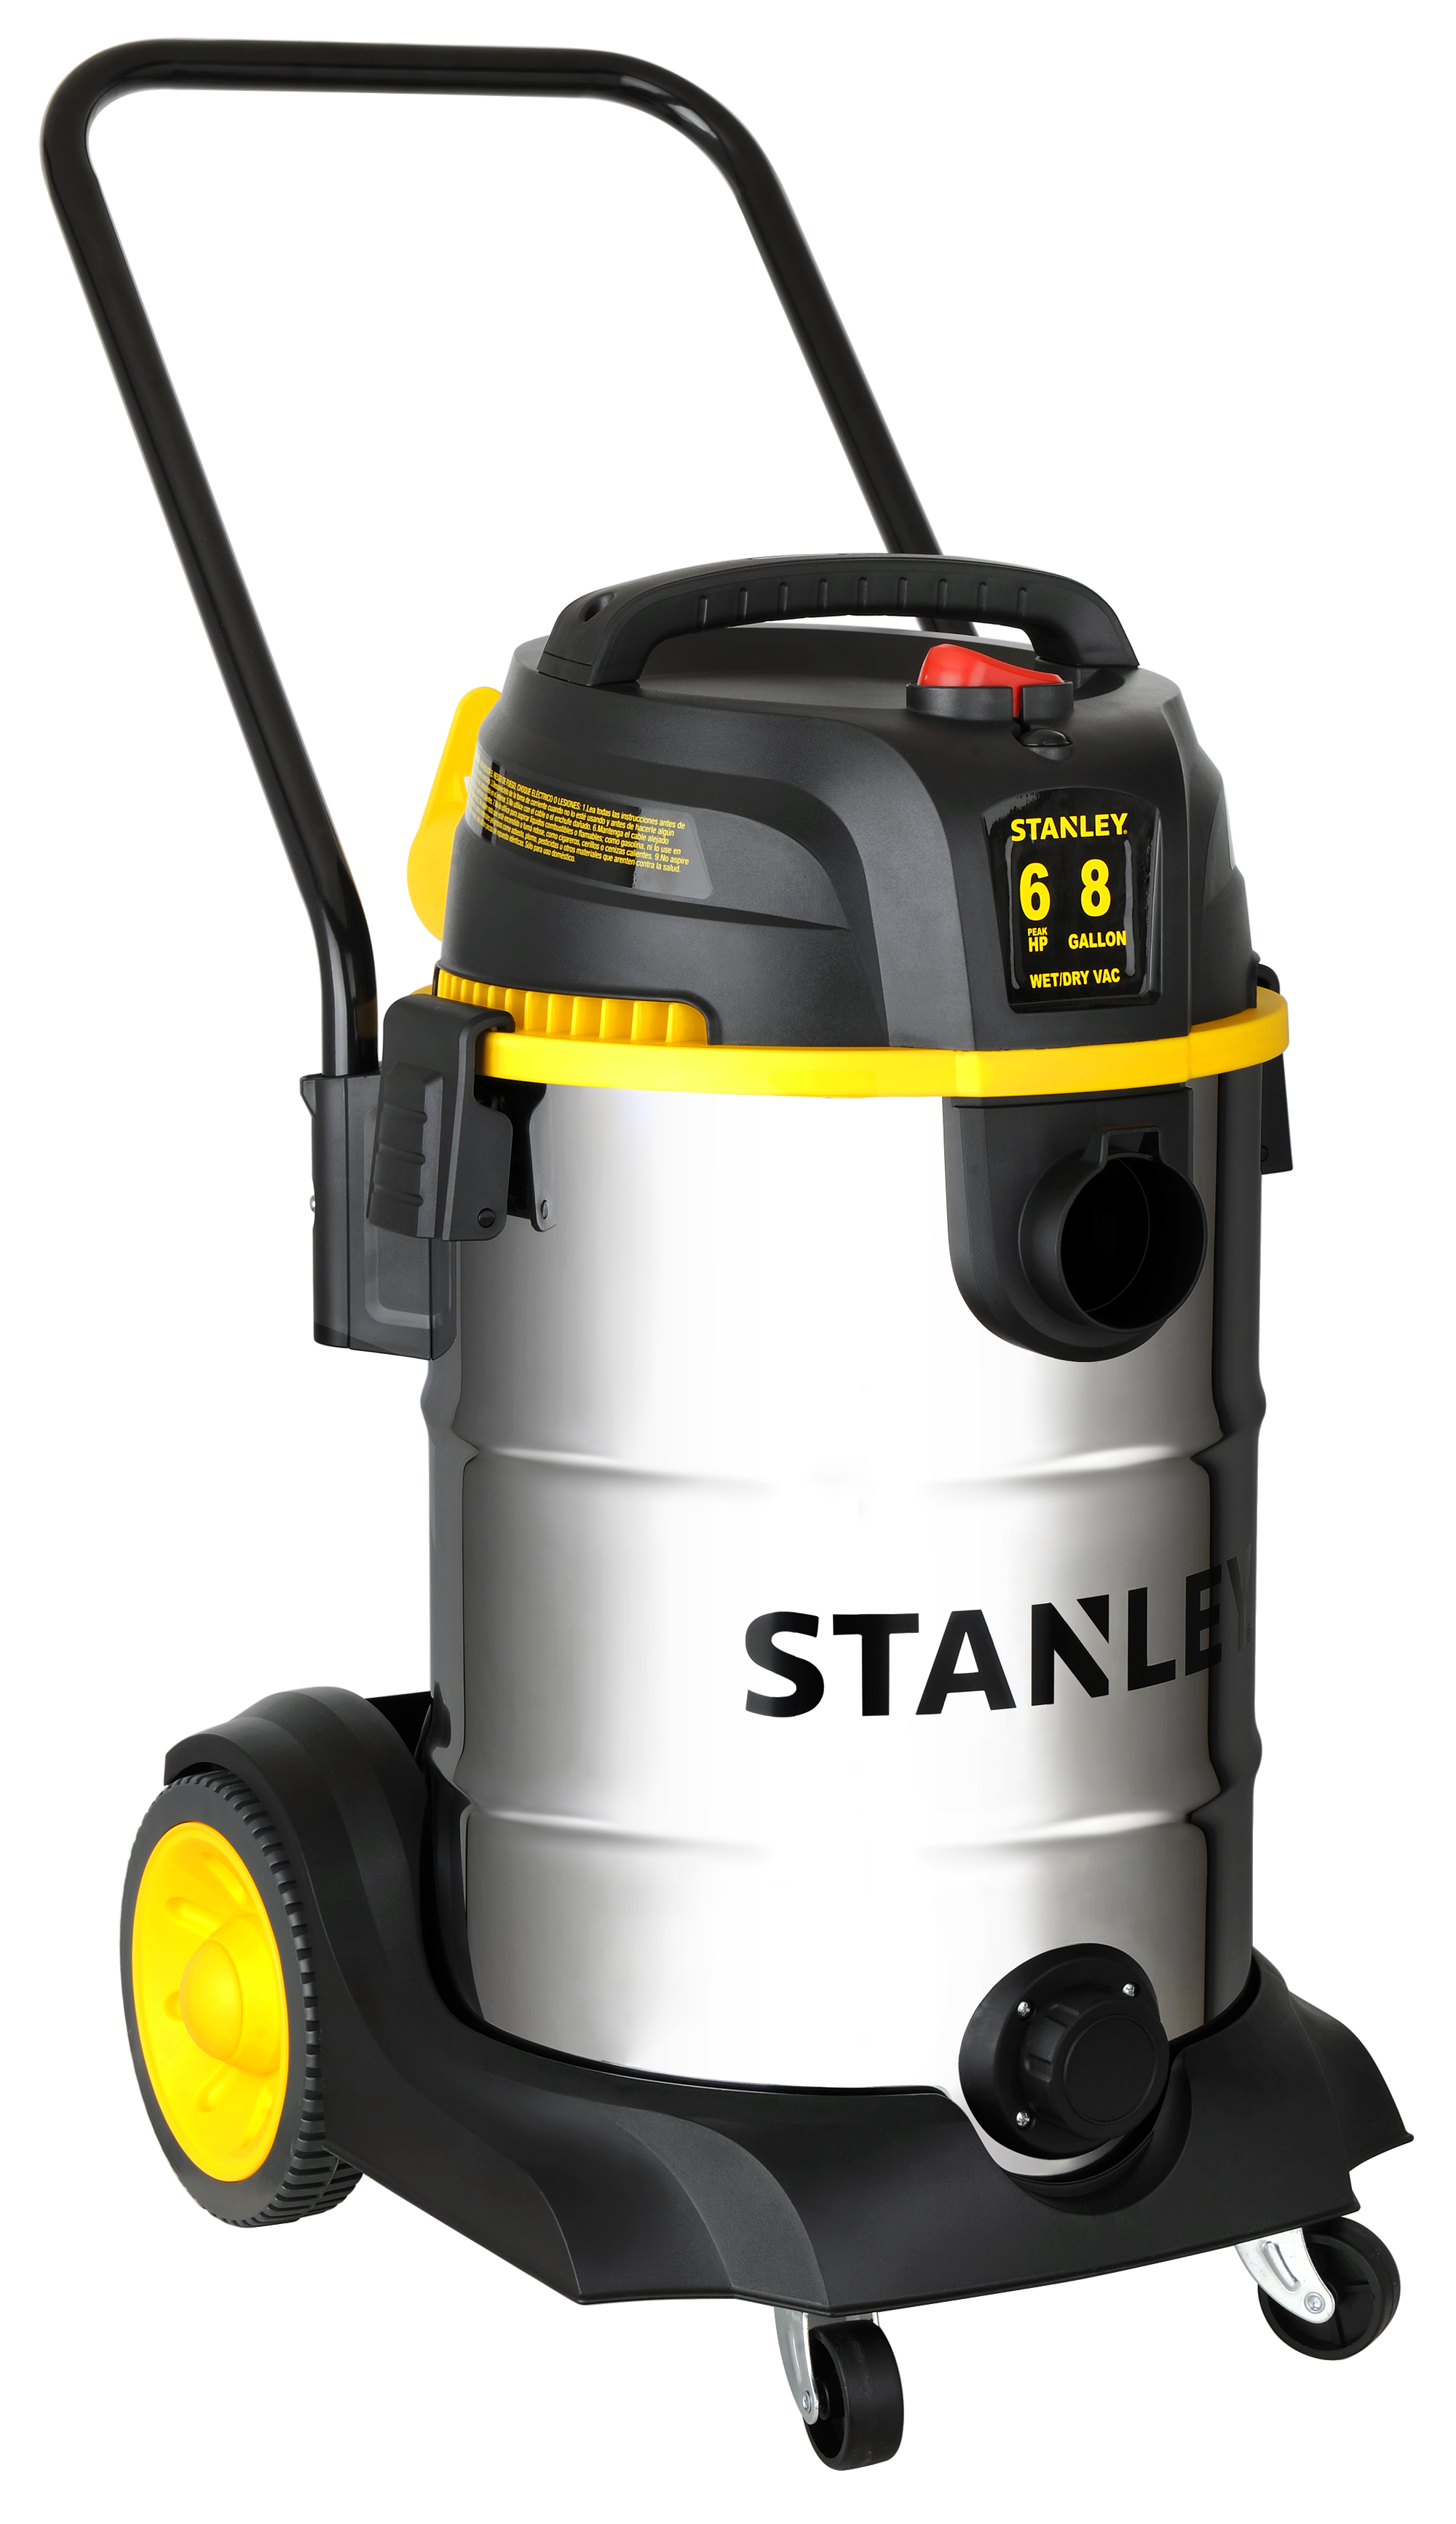 STANLEY 8 gal Stainless Steel Wet Dry Vacuum with Hose Accessories and Tool Storage - image 1 of 7